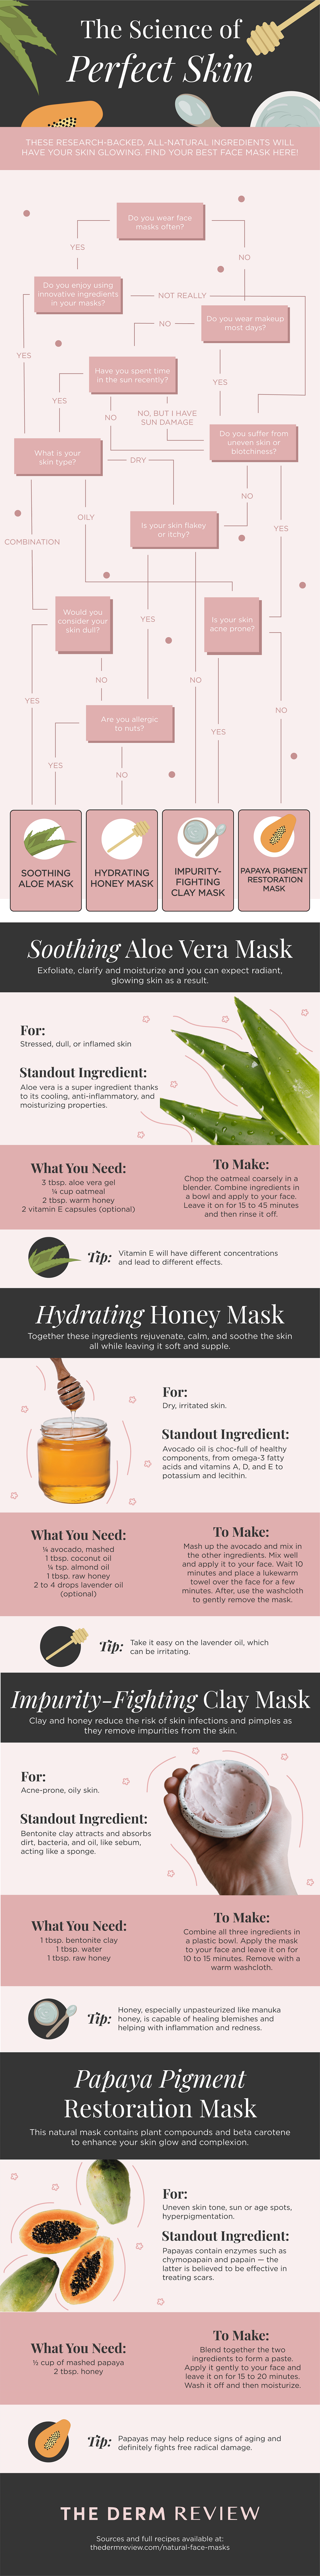 Infographic: the Science of Perfect Skin, natural facial mask recipes